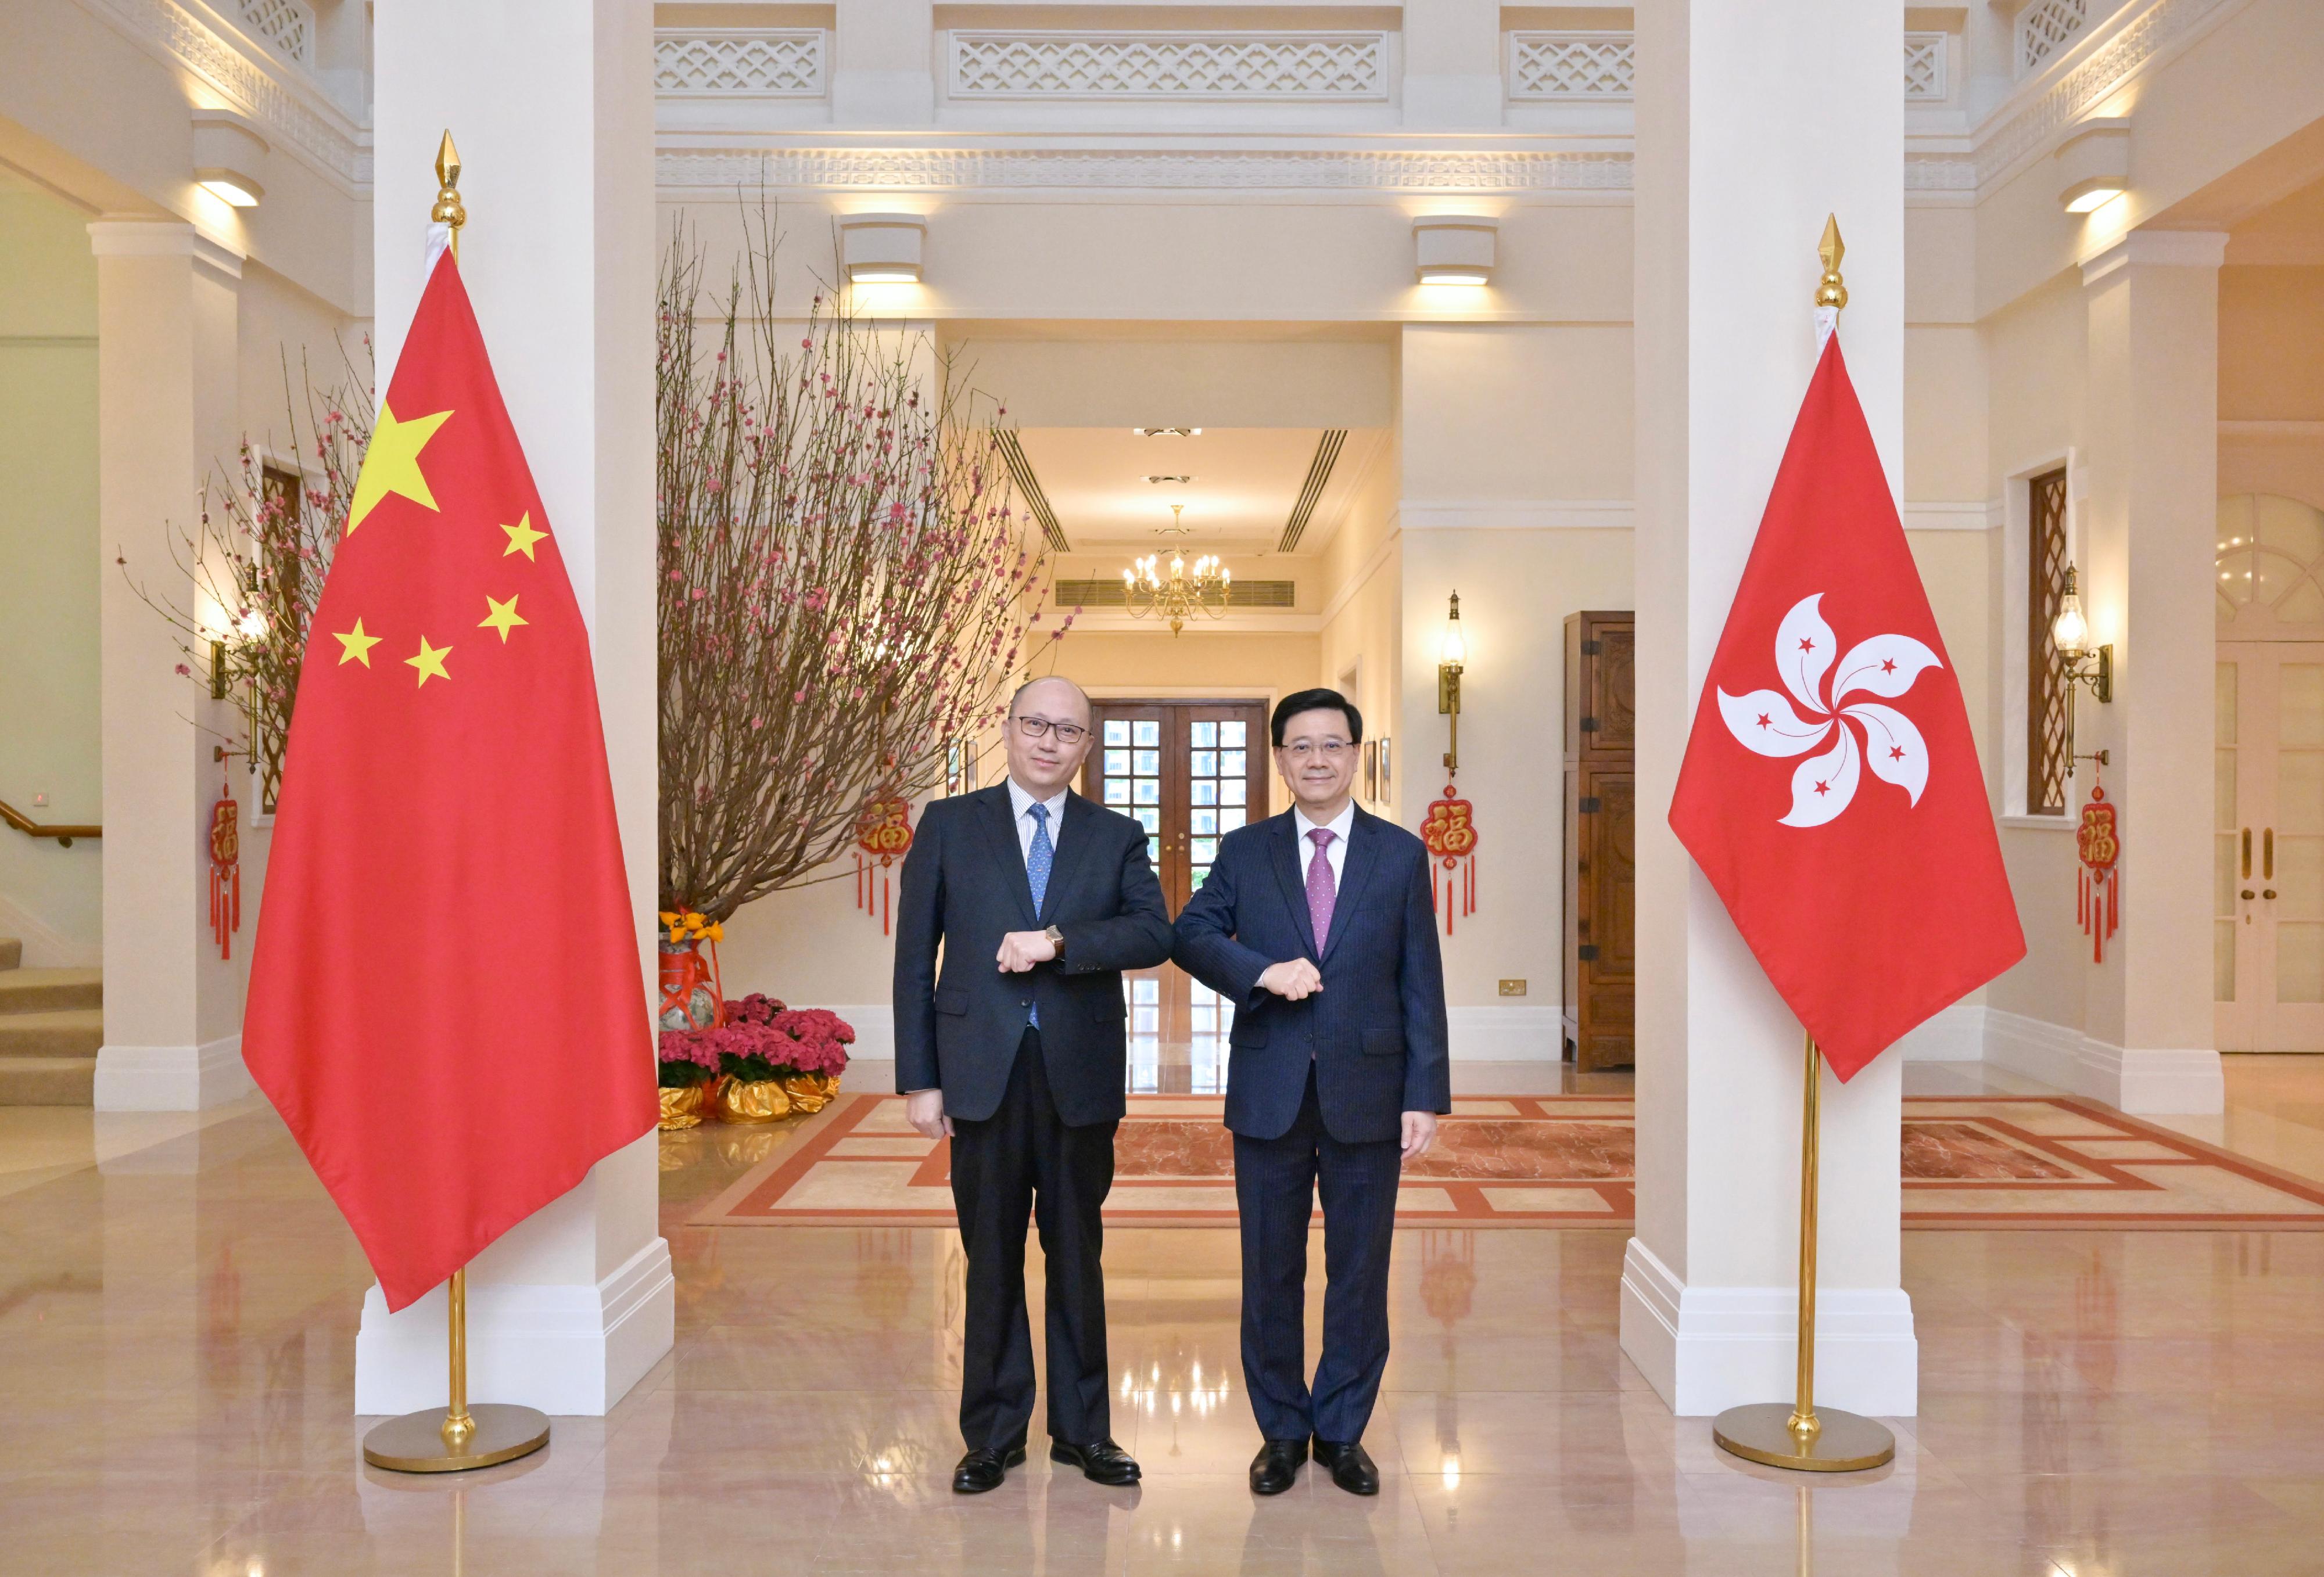 The Chief Executive, Mr John Lee (right), meets the new Director of the Liaison Office of the Central People's Government in the Hong Kong Special Administrative Region, Mr Zheng Yanxiong (left), at Government House today (January 17).